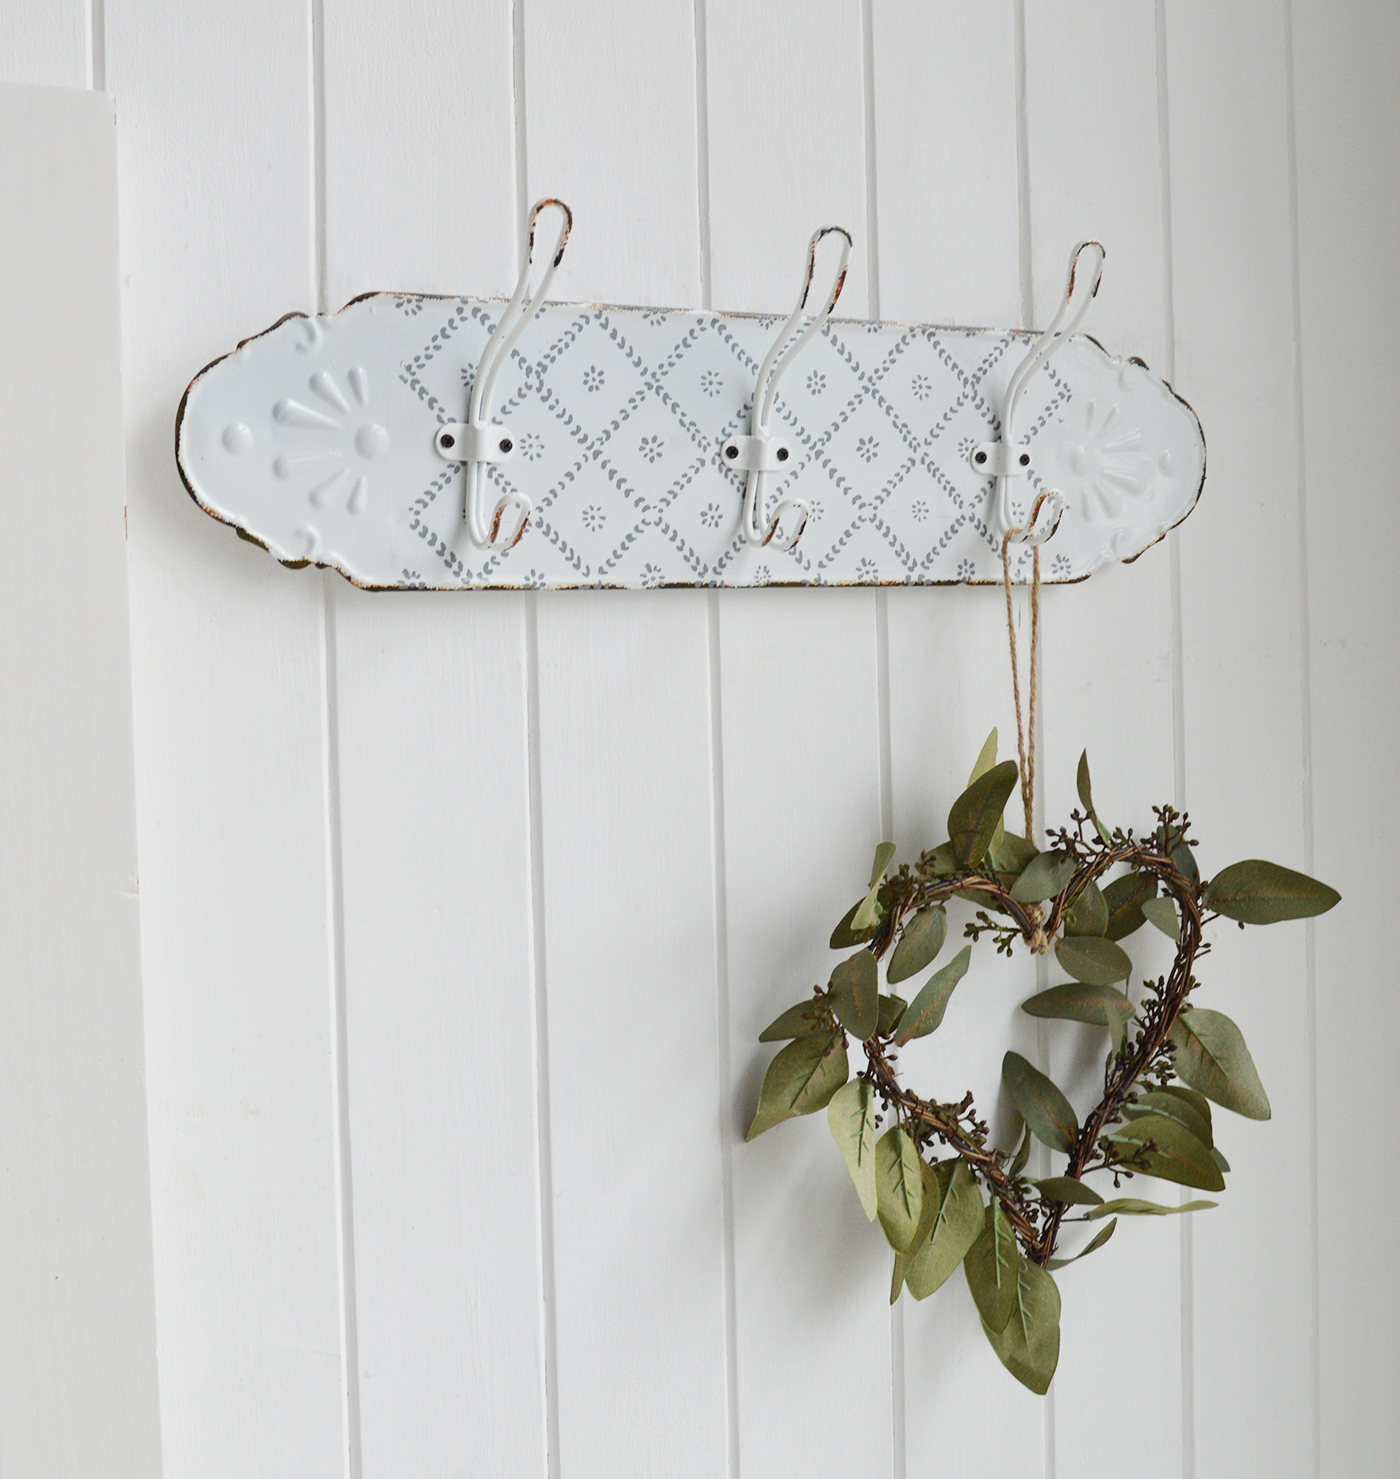 Appleton Vintage Metal Coat Hooks Rack with 3 hooks for New England coastal, country and farmhouse homes and interiors